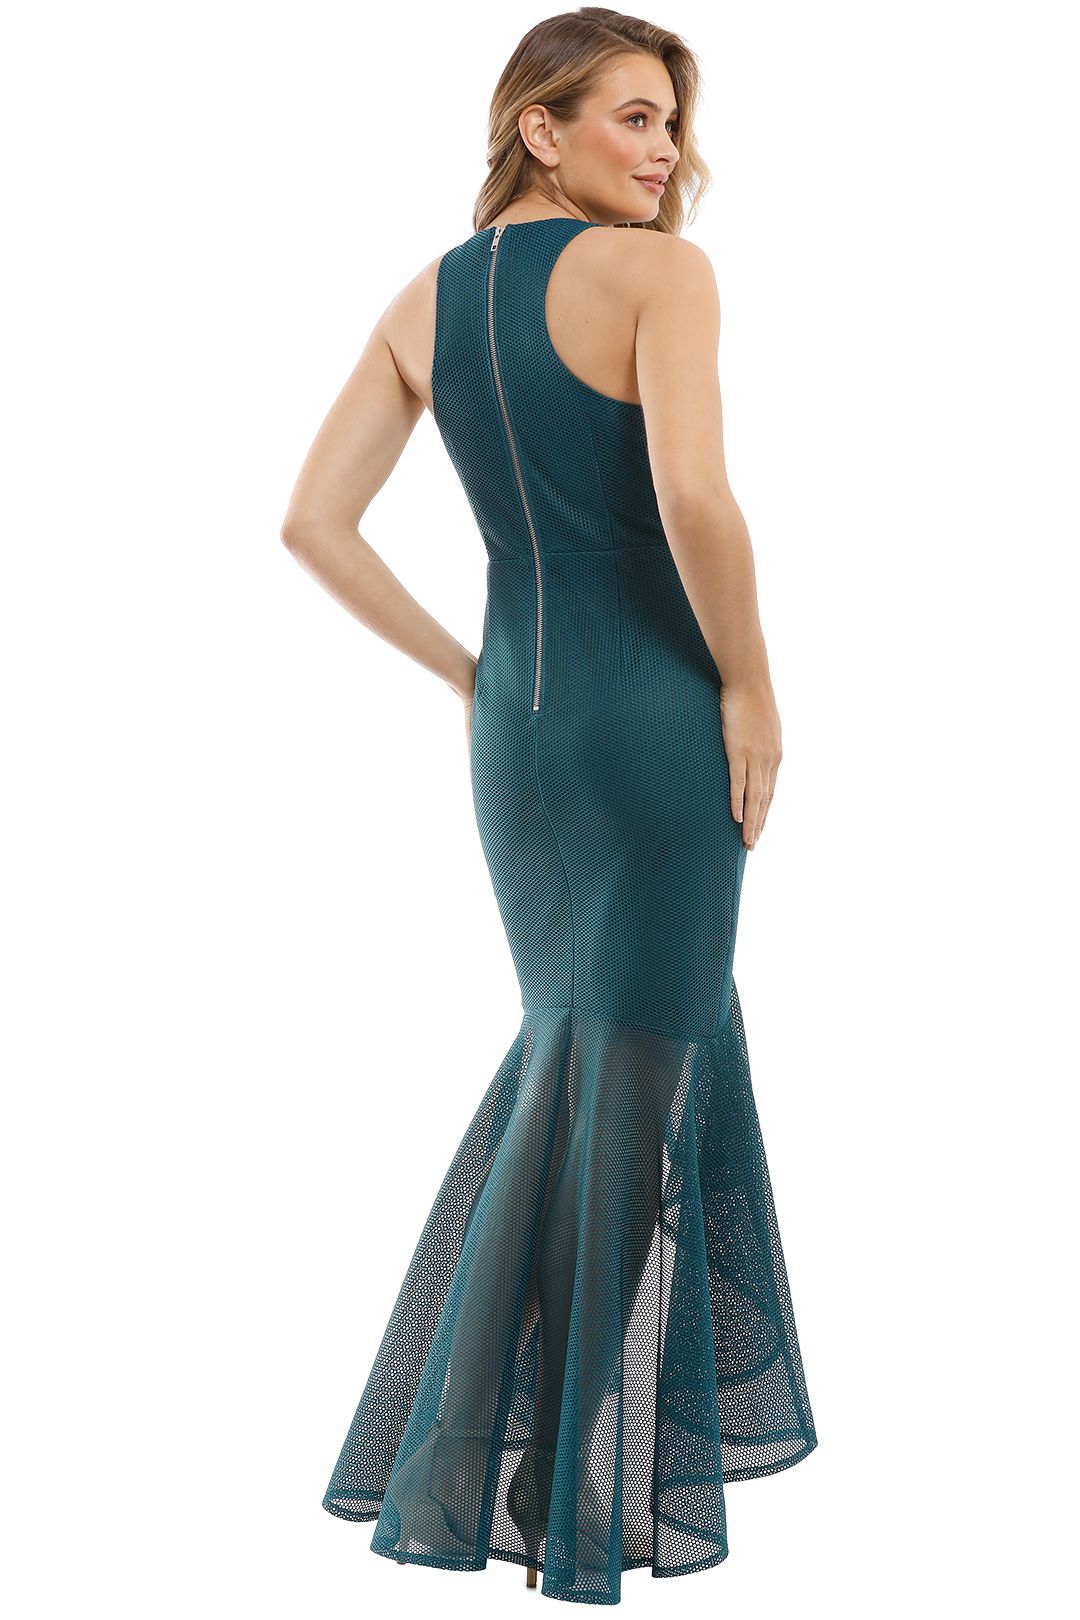 Stand Alone Gown in Teal by Grace & Hart for Rent